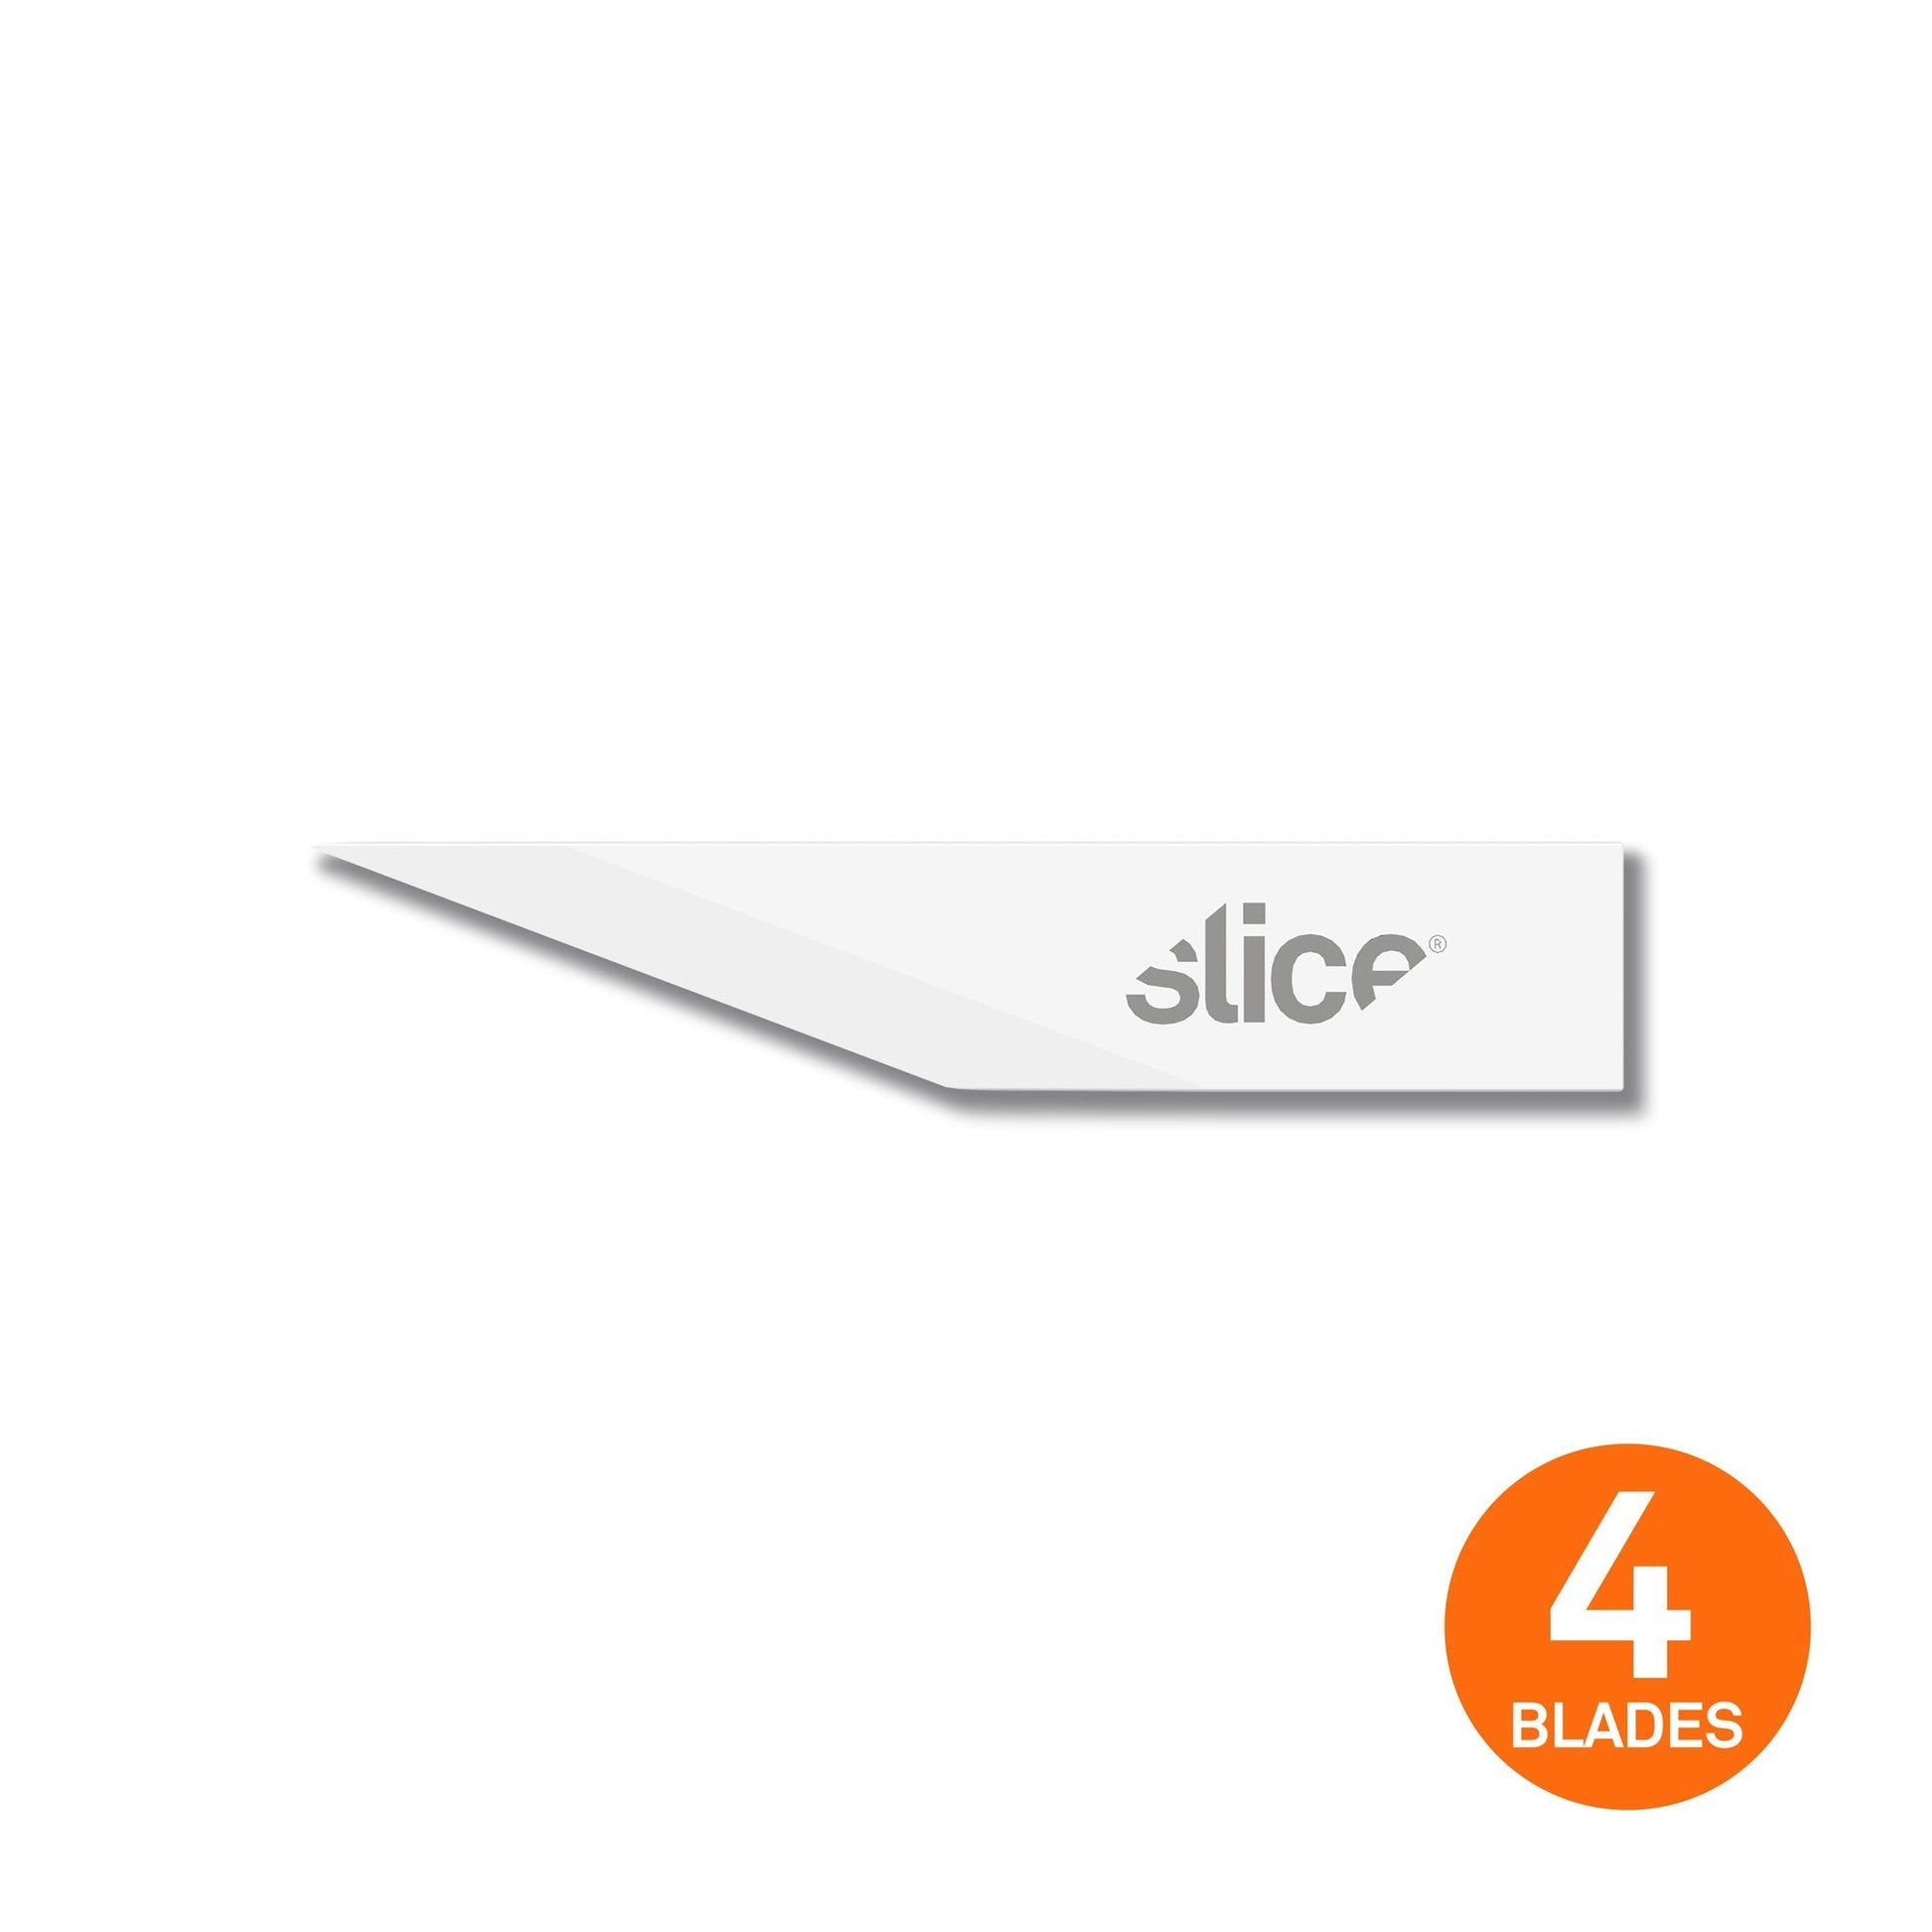 The Slice 10519 Craft Blade with a straight edge and pointed tip